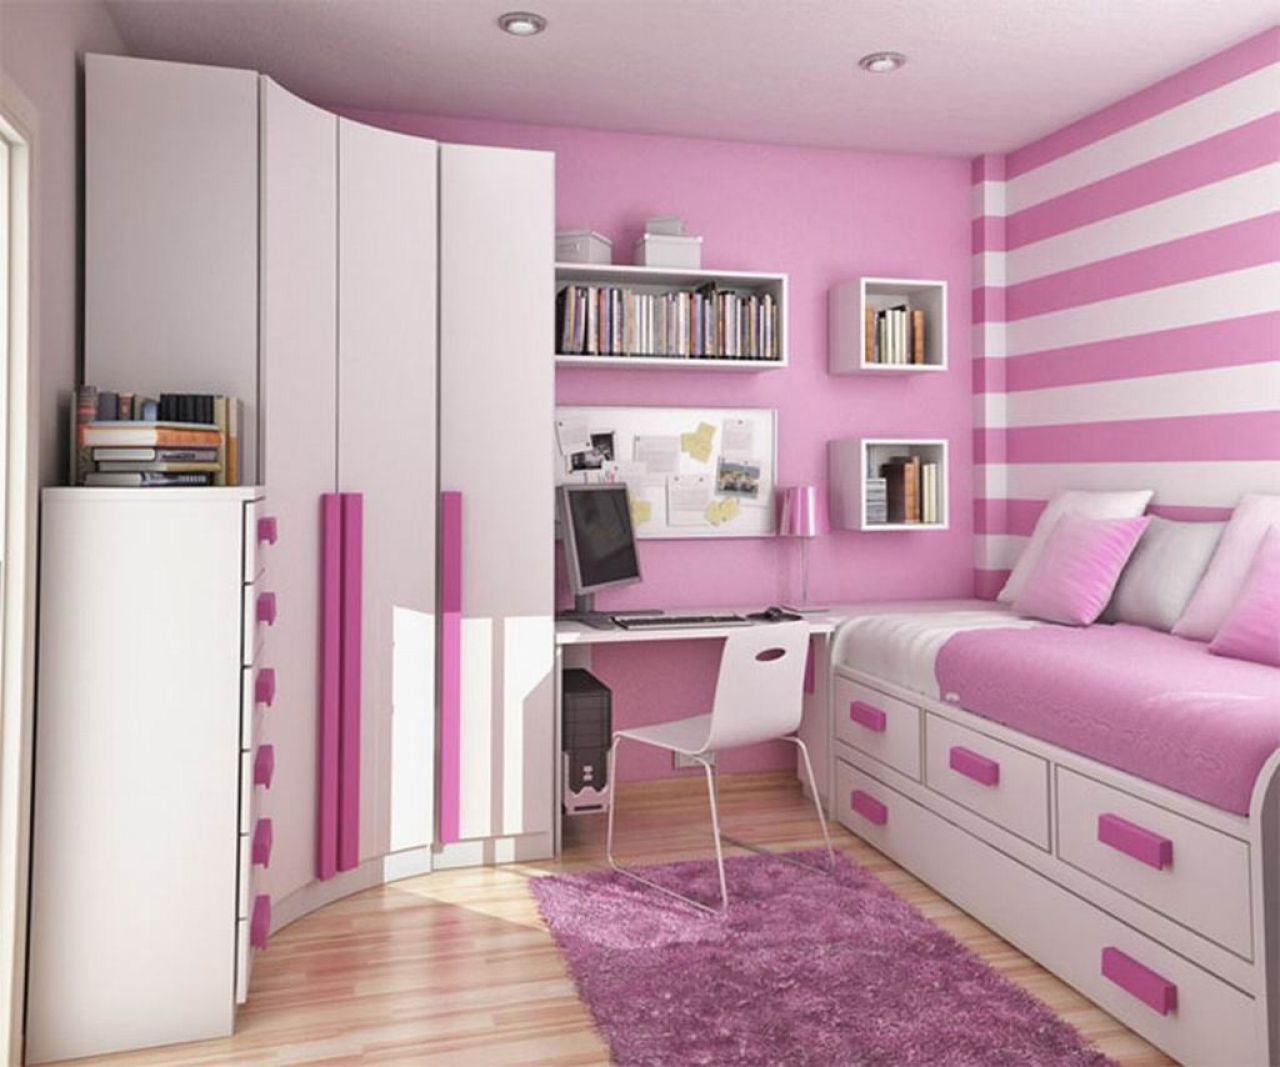 BEDROOM STRIPE WHITE AND PINK WALLPAPER DECOR FOR TEENAGE GIRLS